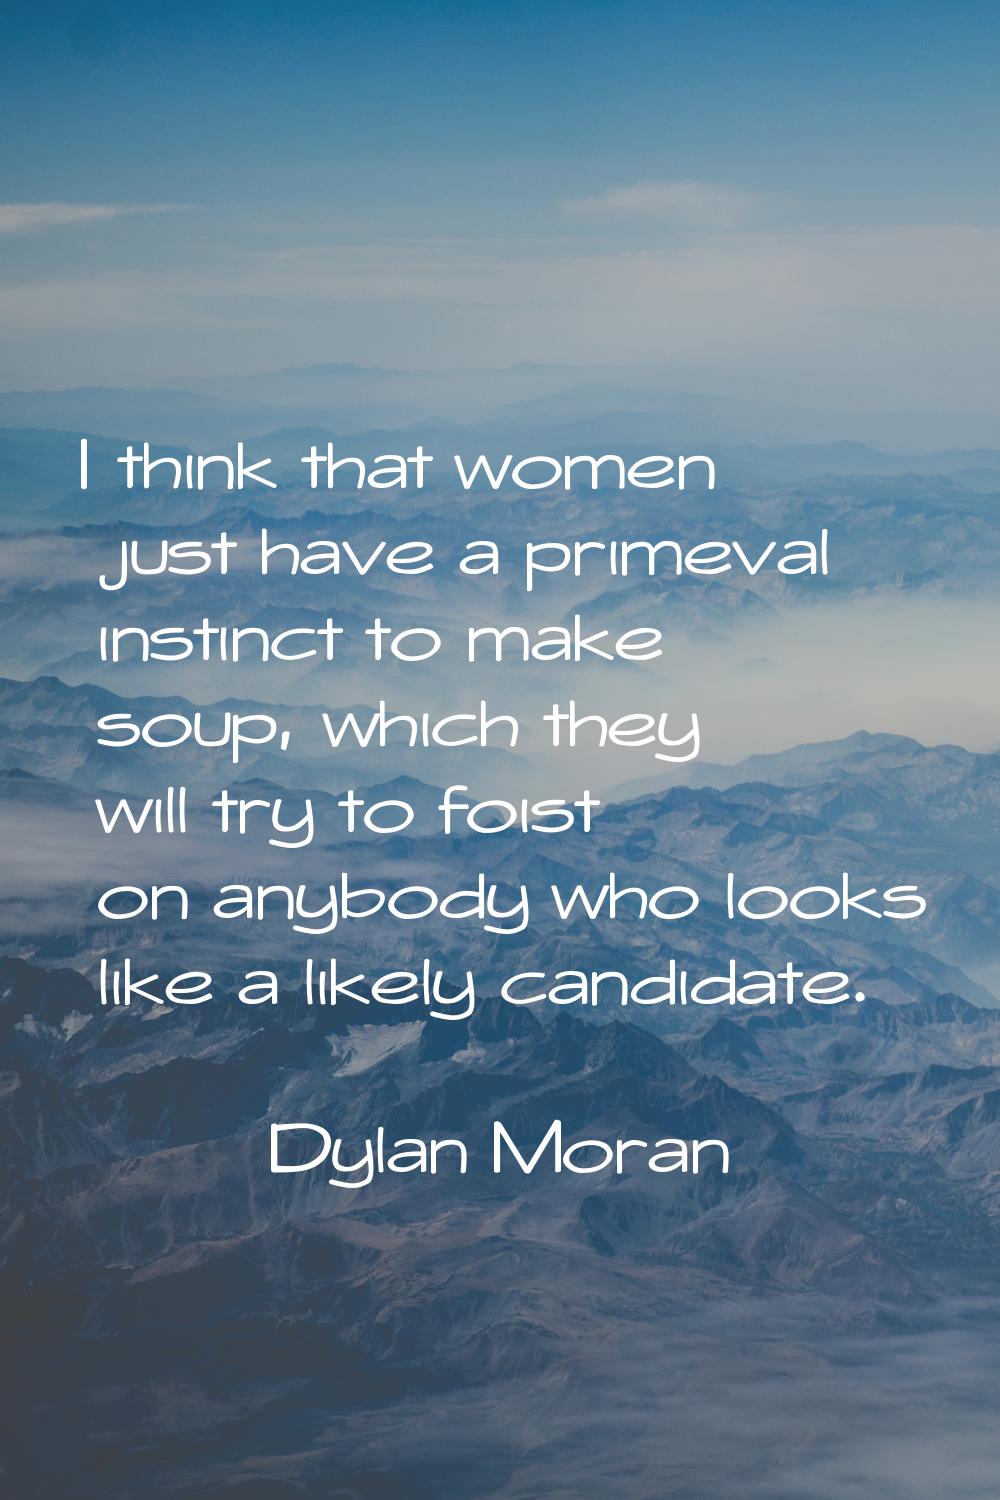 I think that women just have a primeval instinct to make soup, which they will try to foist on anyb